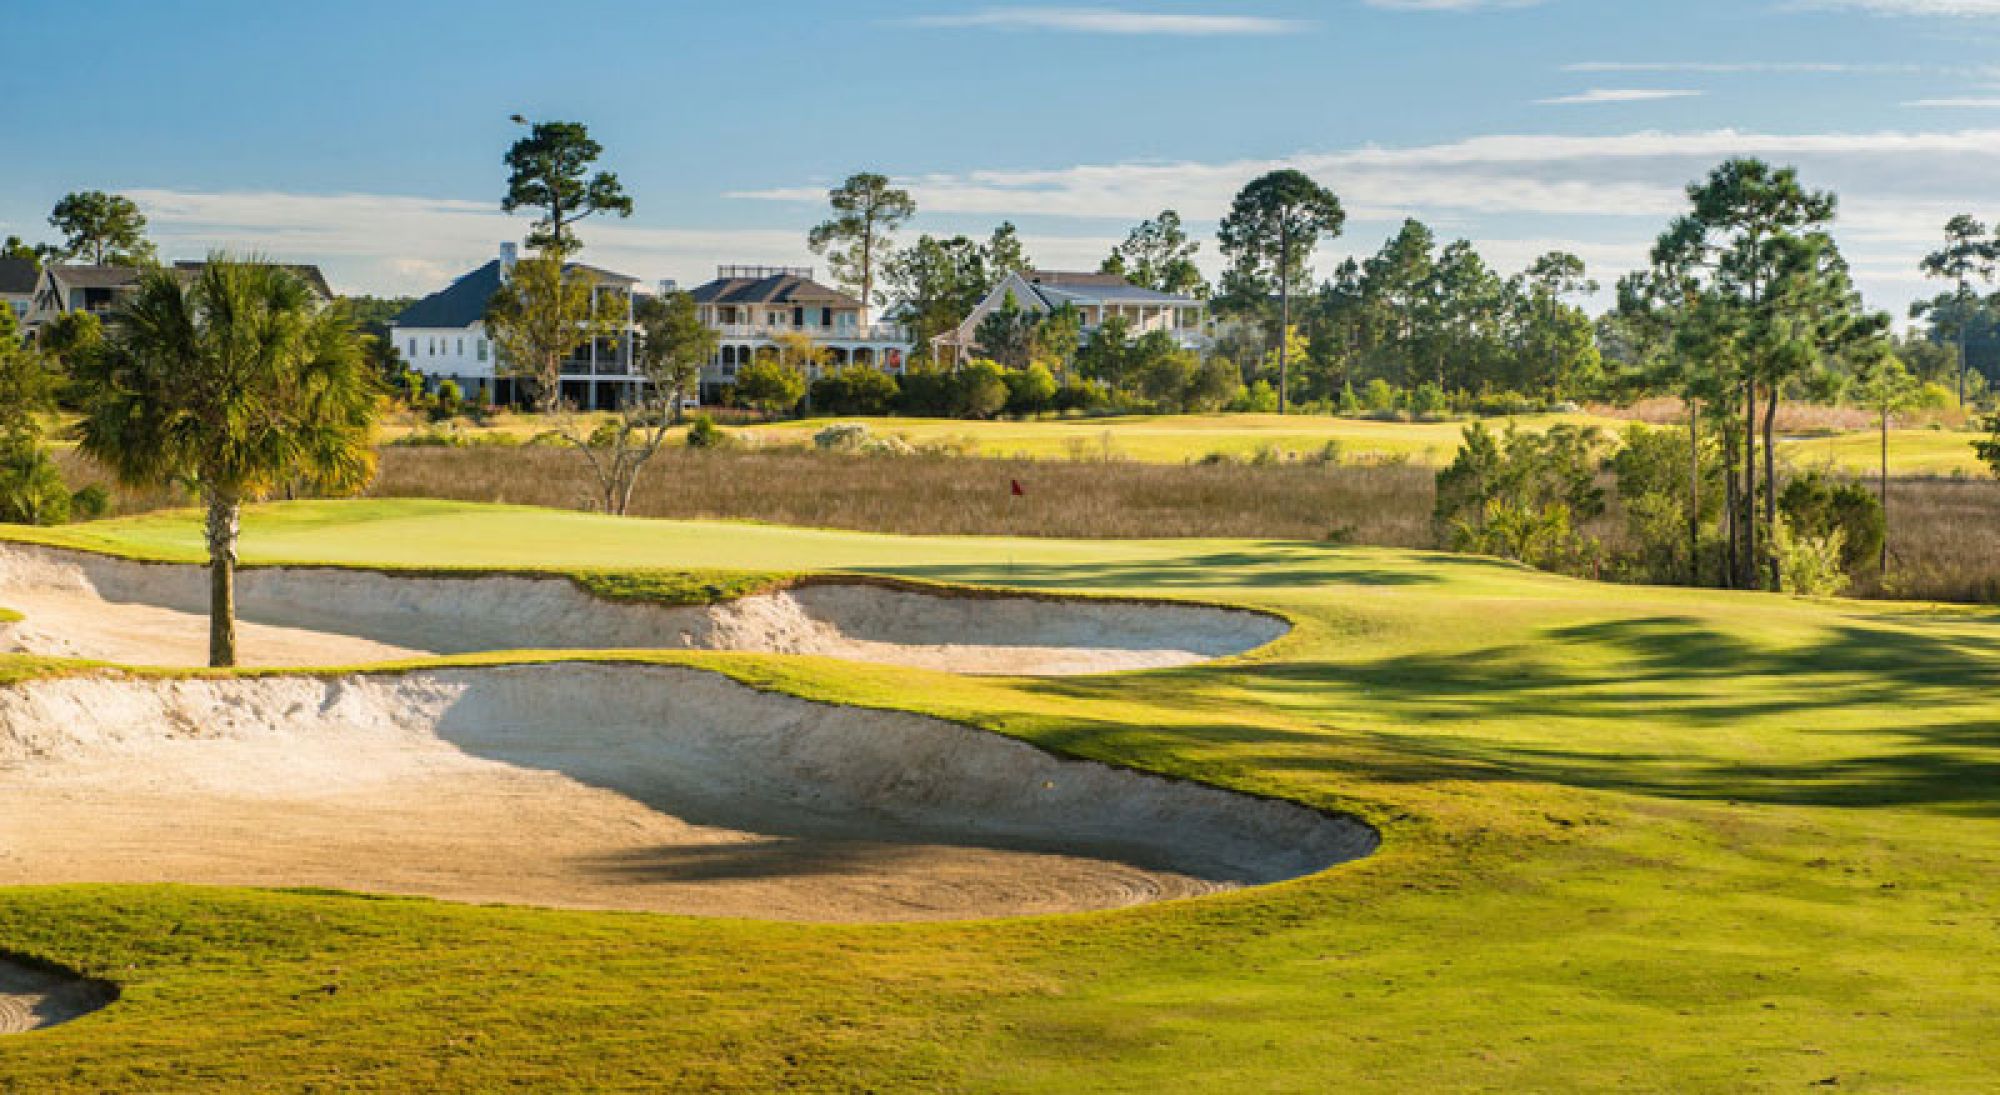 RiverTowne Country Club offers some of the most desirable golf course in South Carolina